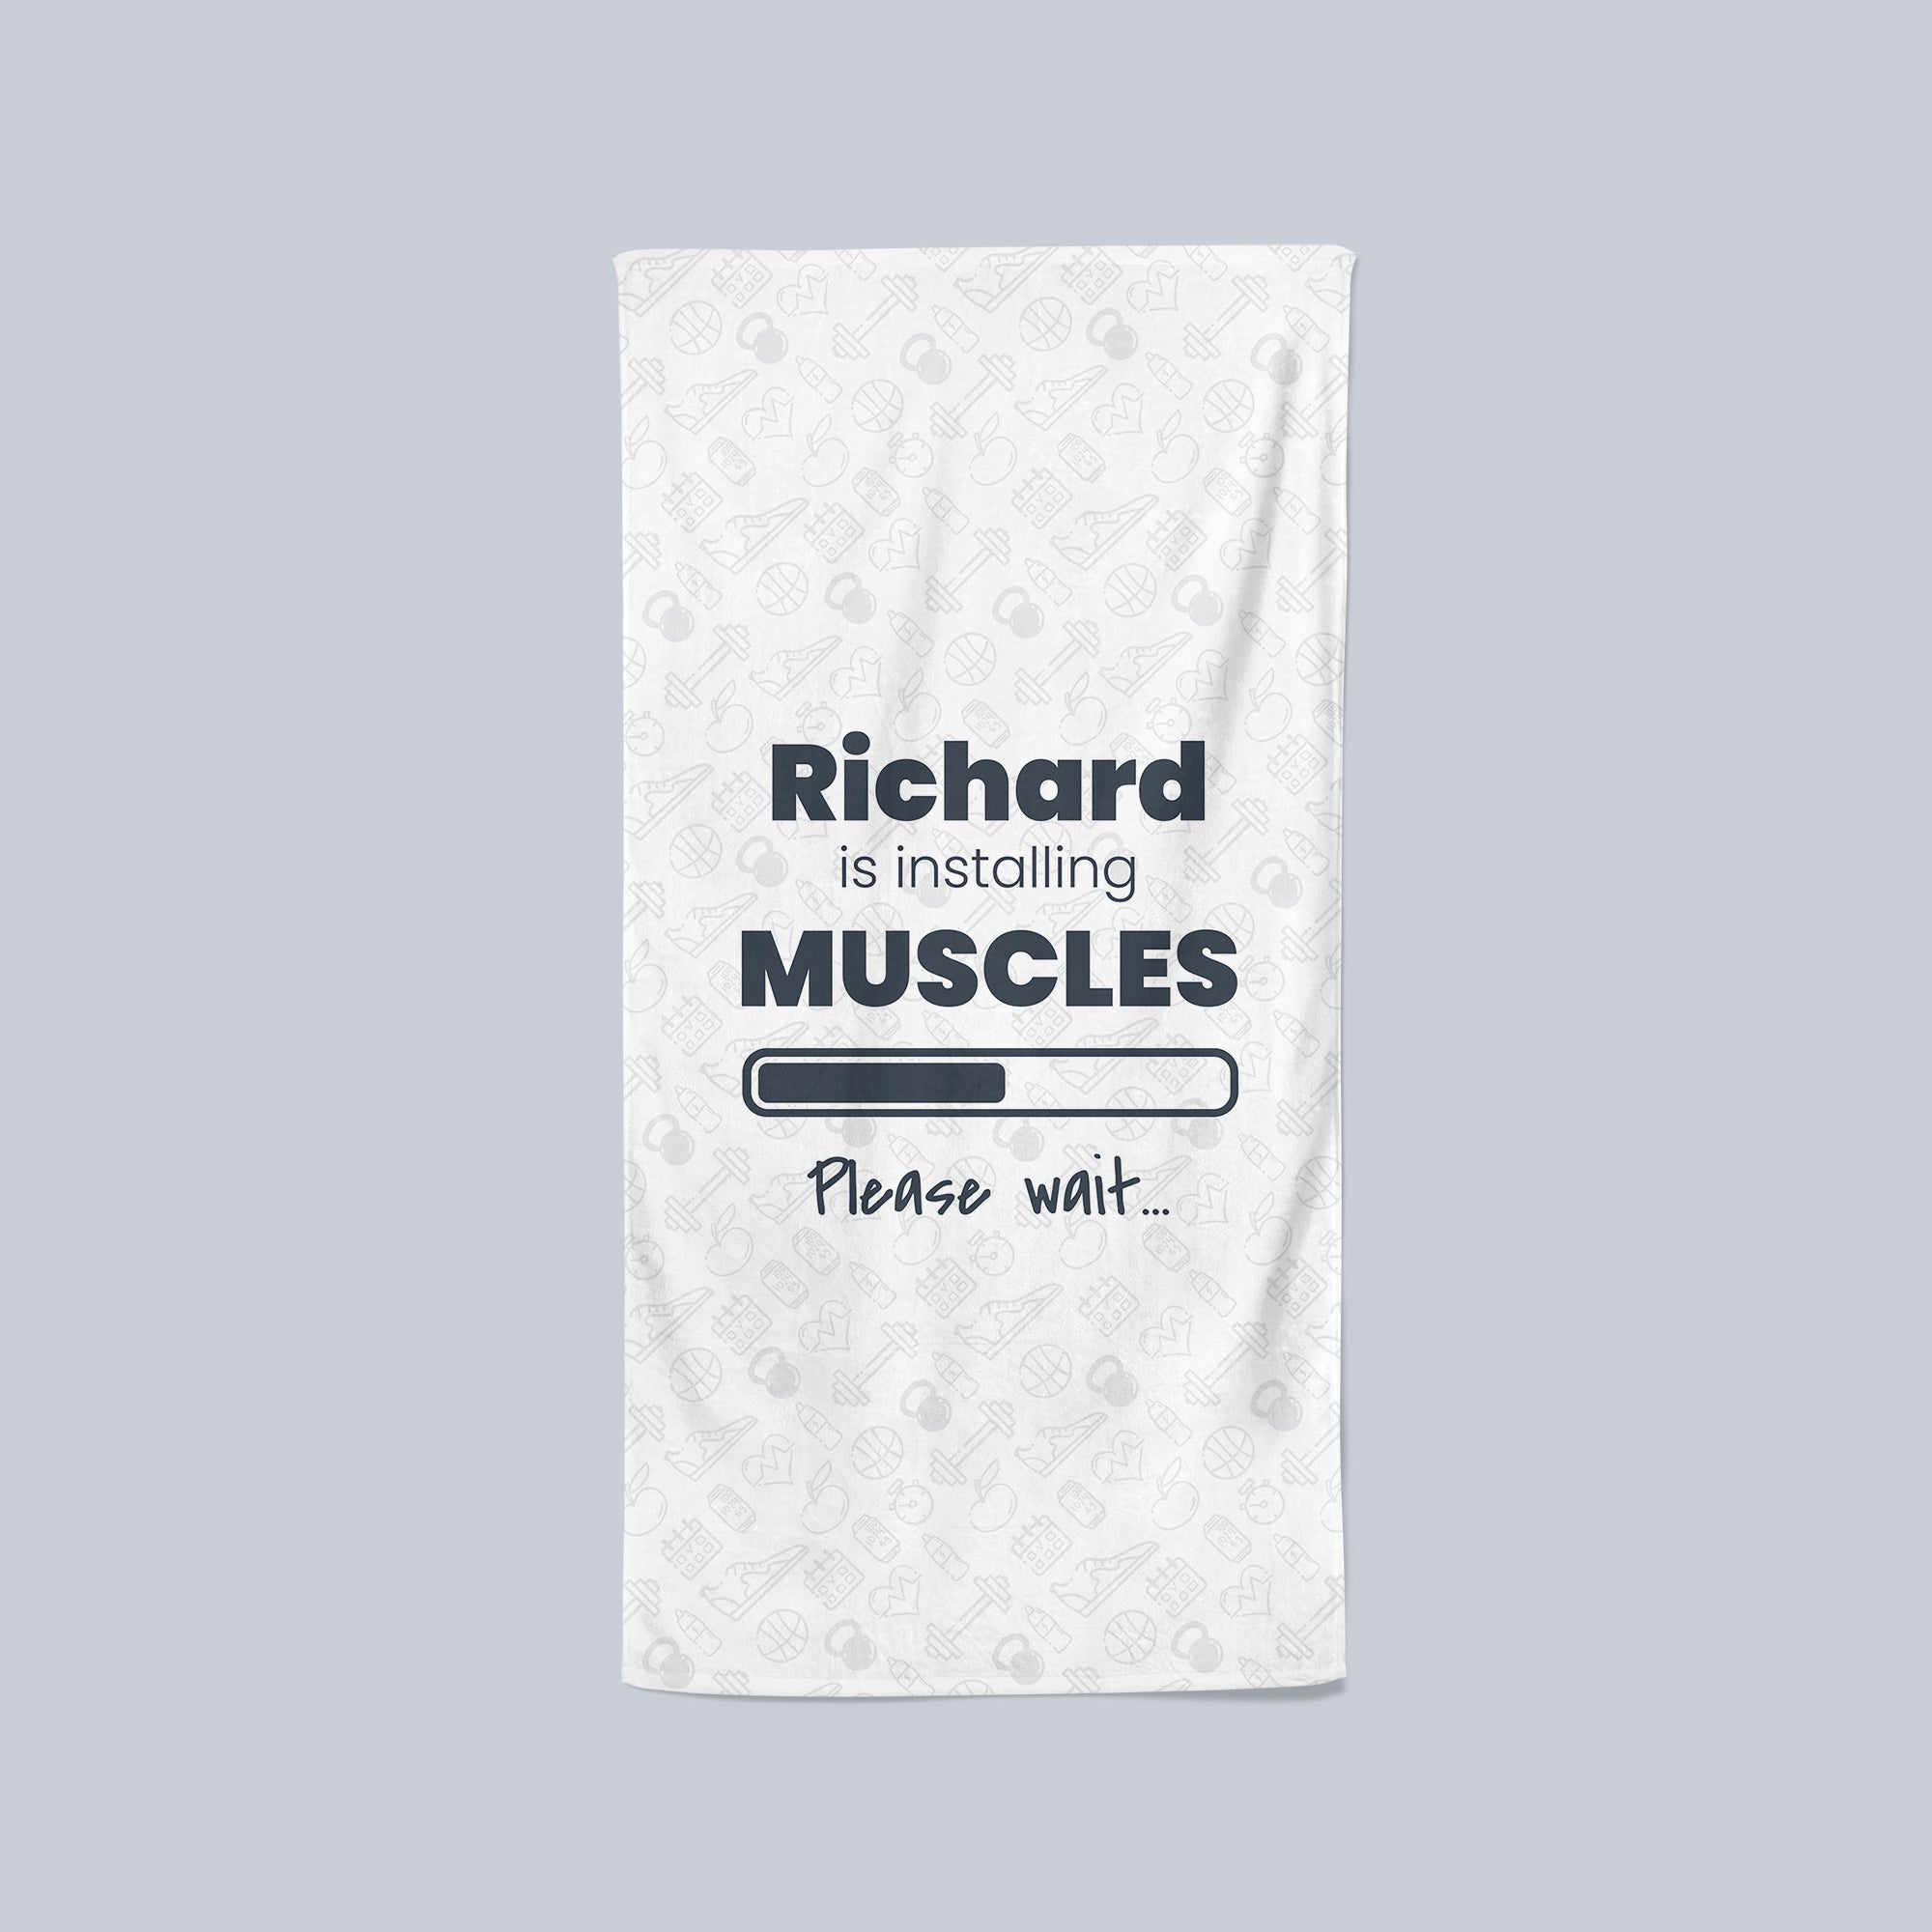 Gym Towel White with Gym Pattern - Installing Muscles - Personalise with Name